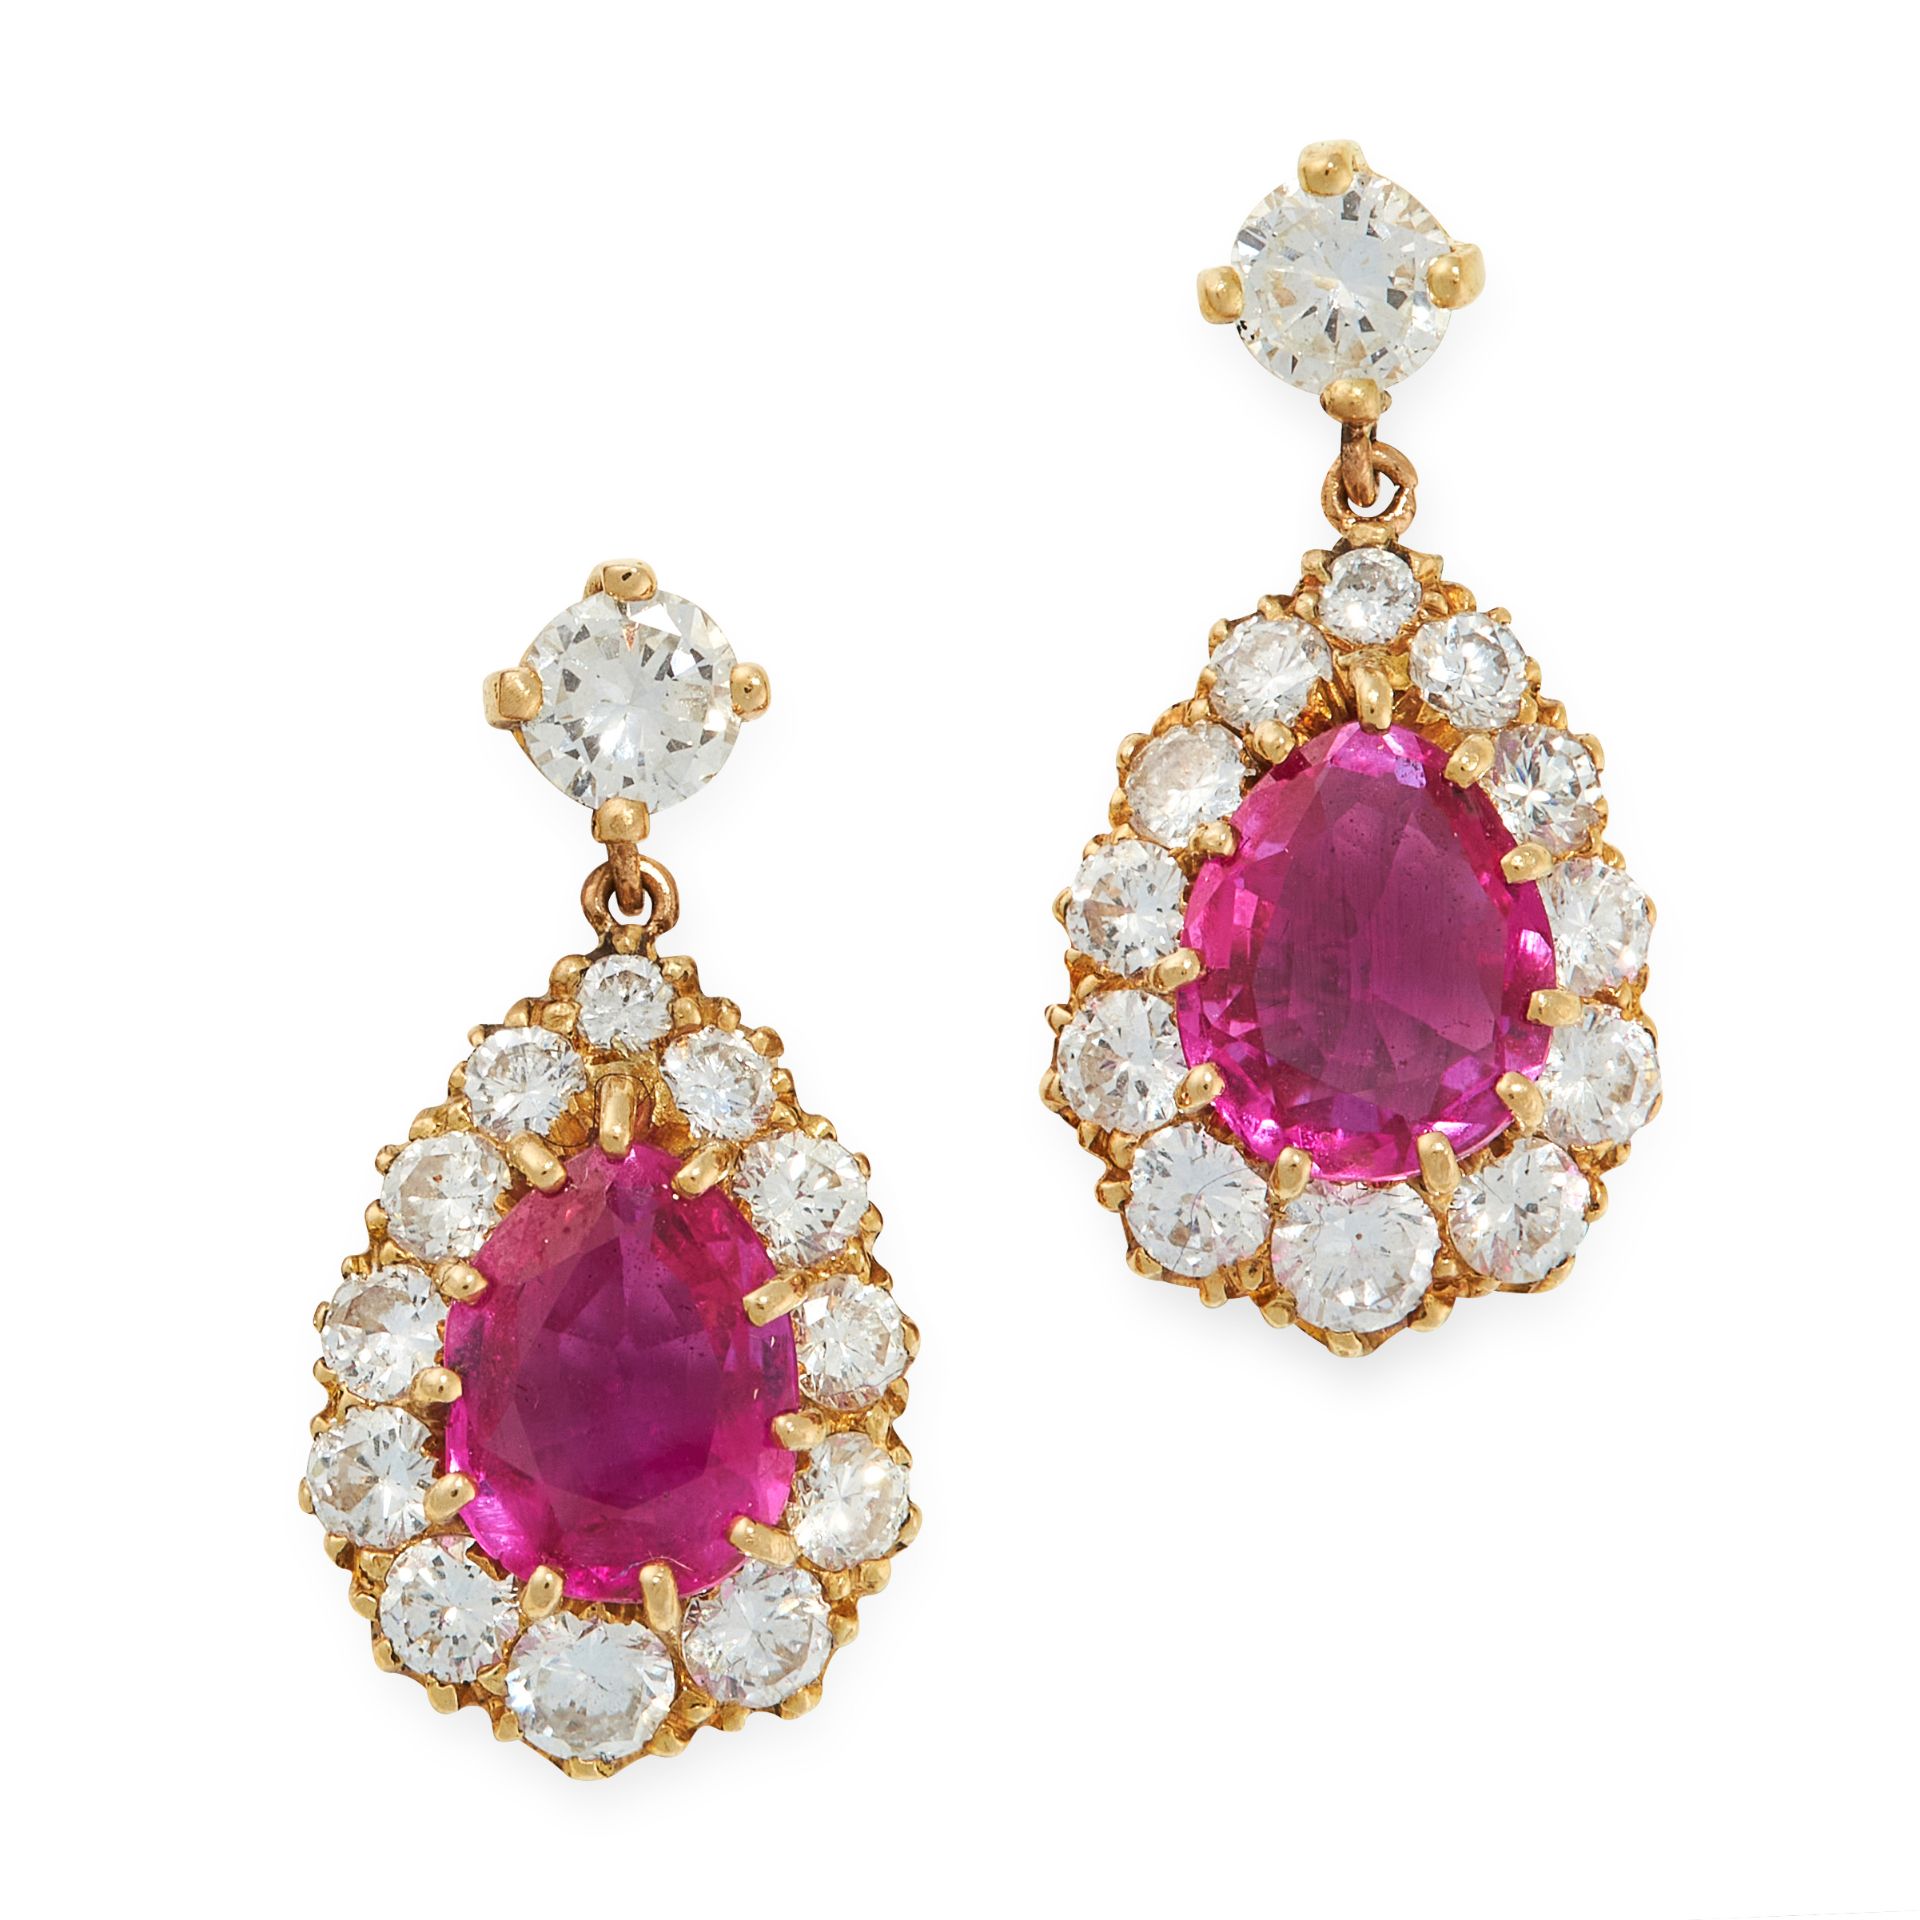 A PAIR OF BURMA NO HEAT RUBY AND DIAMOND EARRINGS in 18ct yellow gold, each set with a pear cut